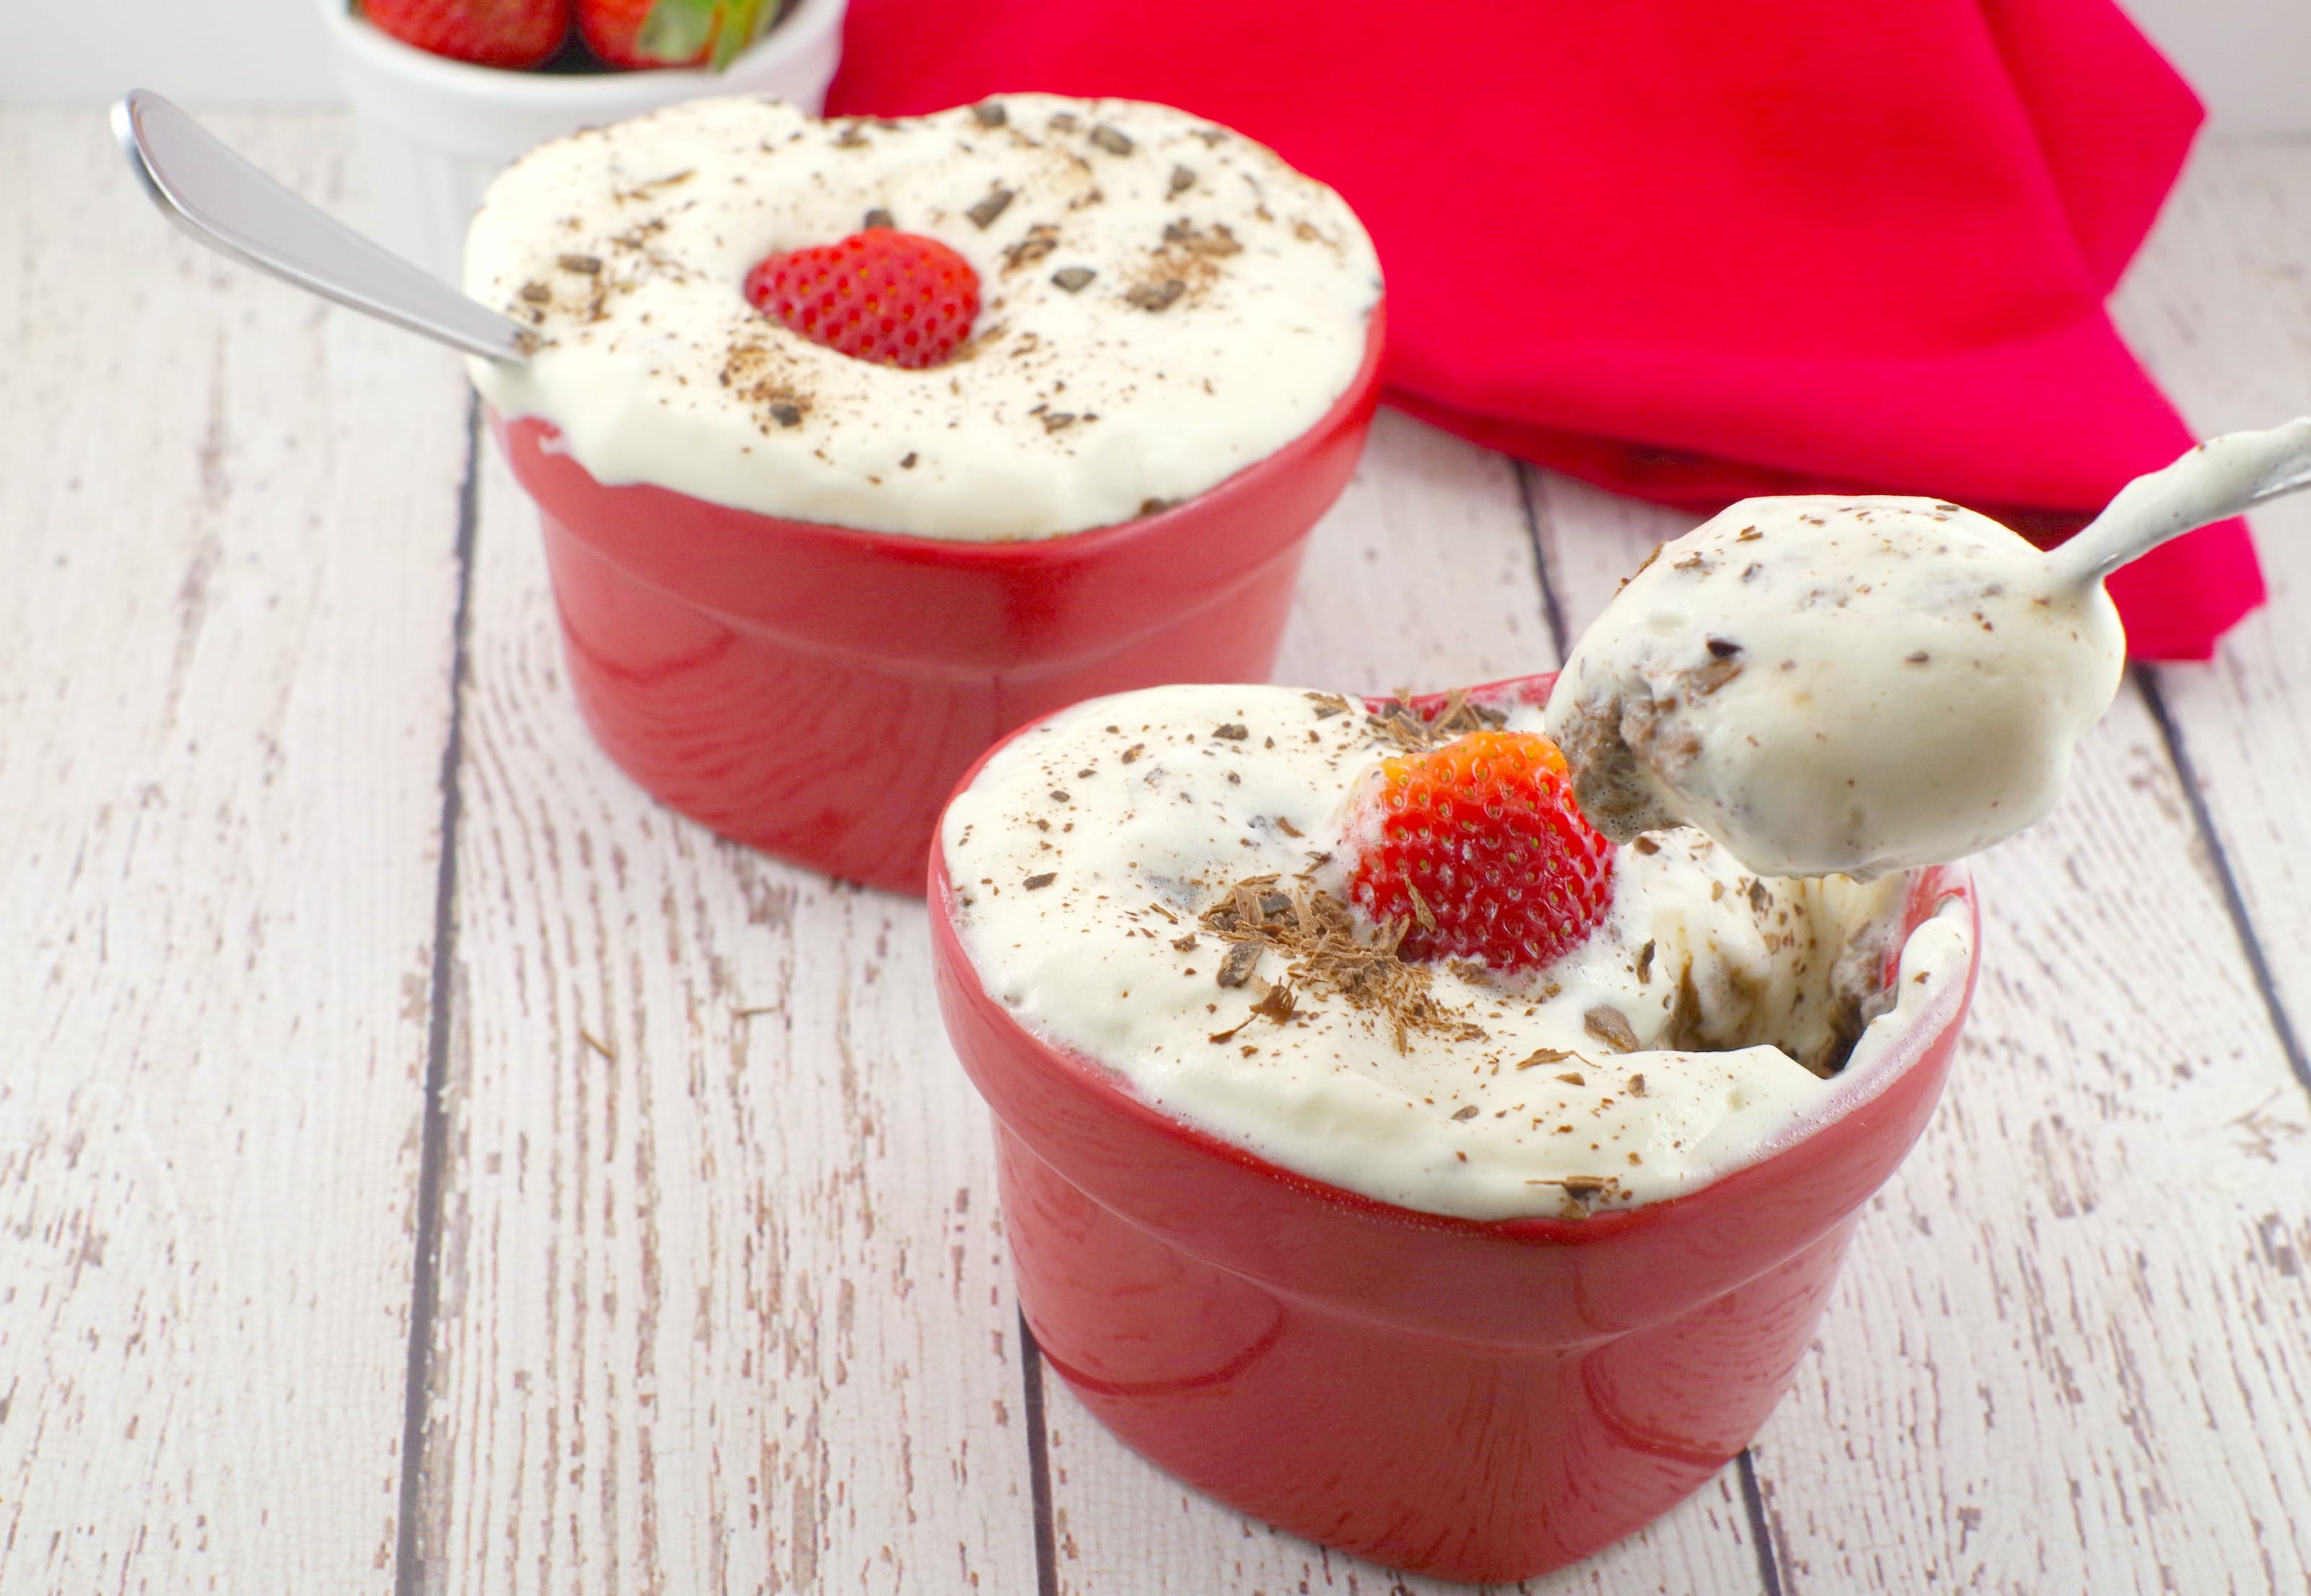 Healthy Heart Shaped Valentine's Day Dessert - Foodmeanderings.com